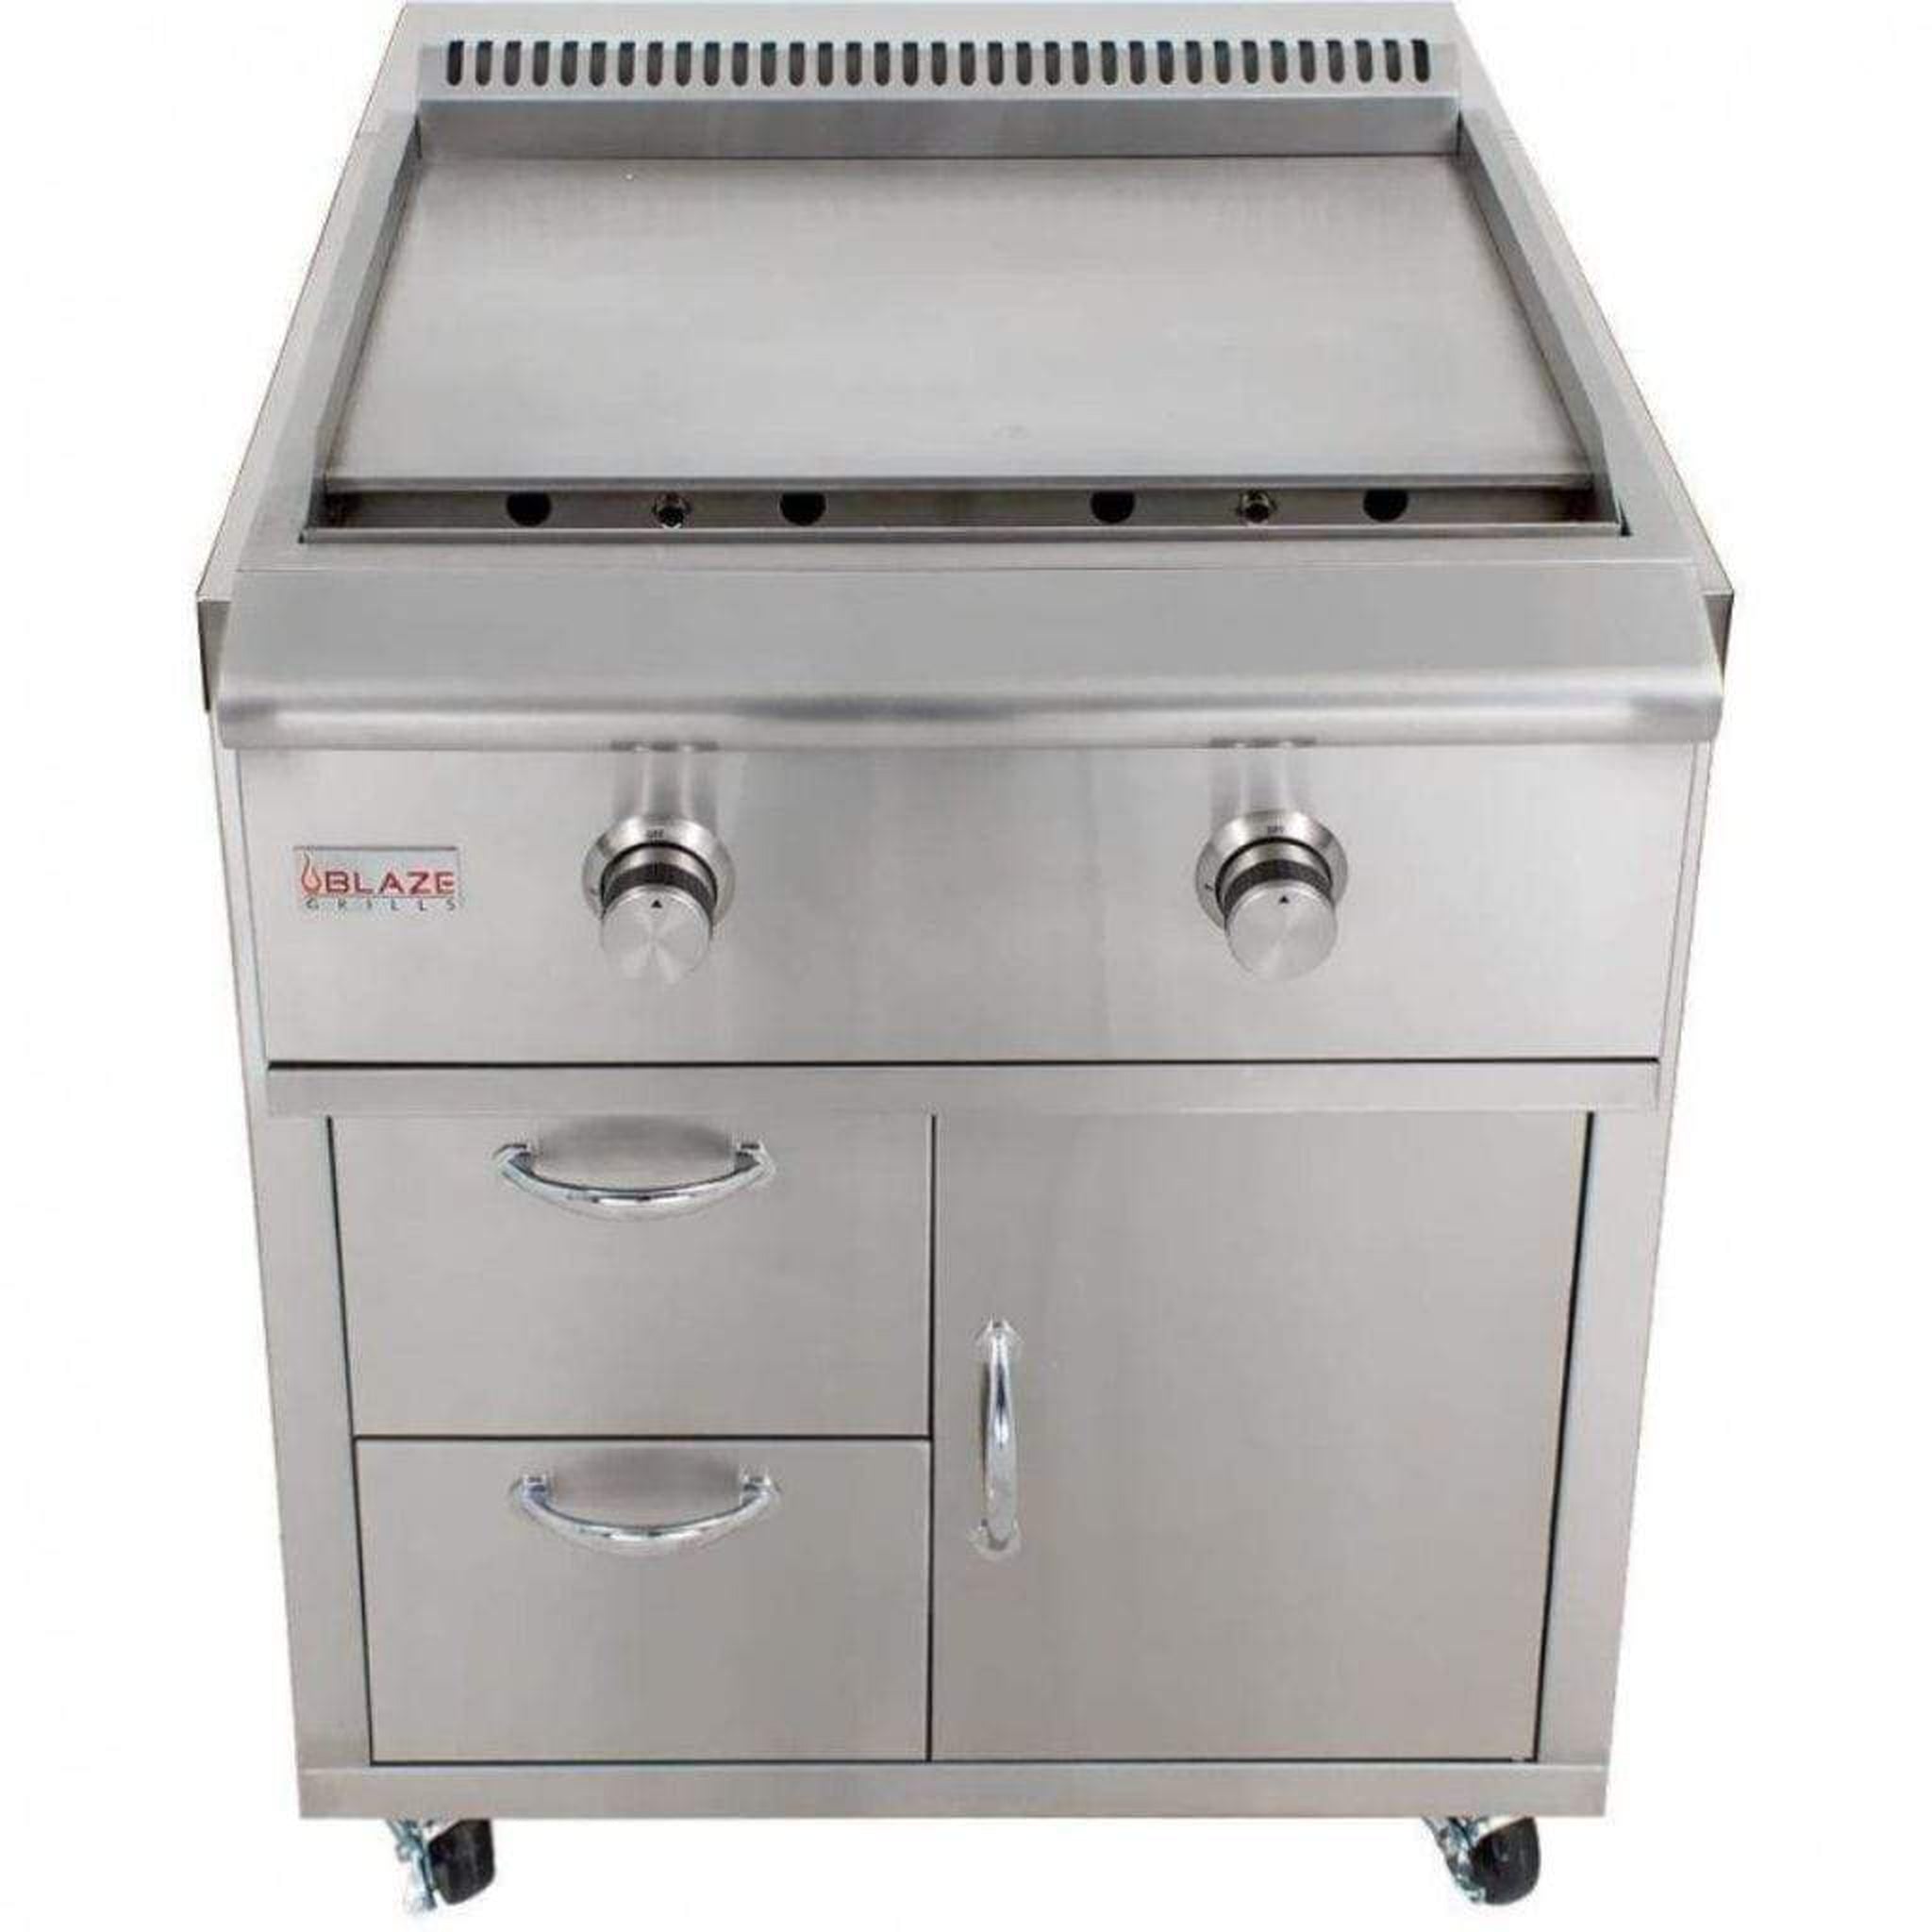 blaze-30-grill-cart-for-gas-griddle-cart-only 1